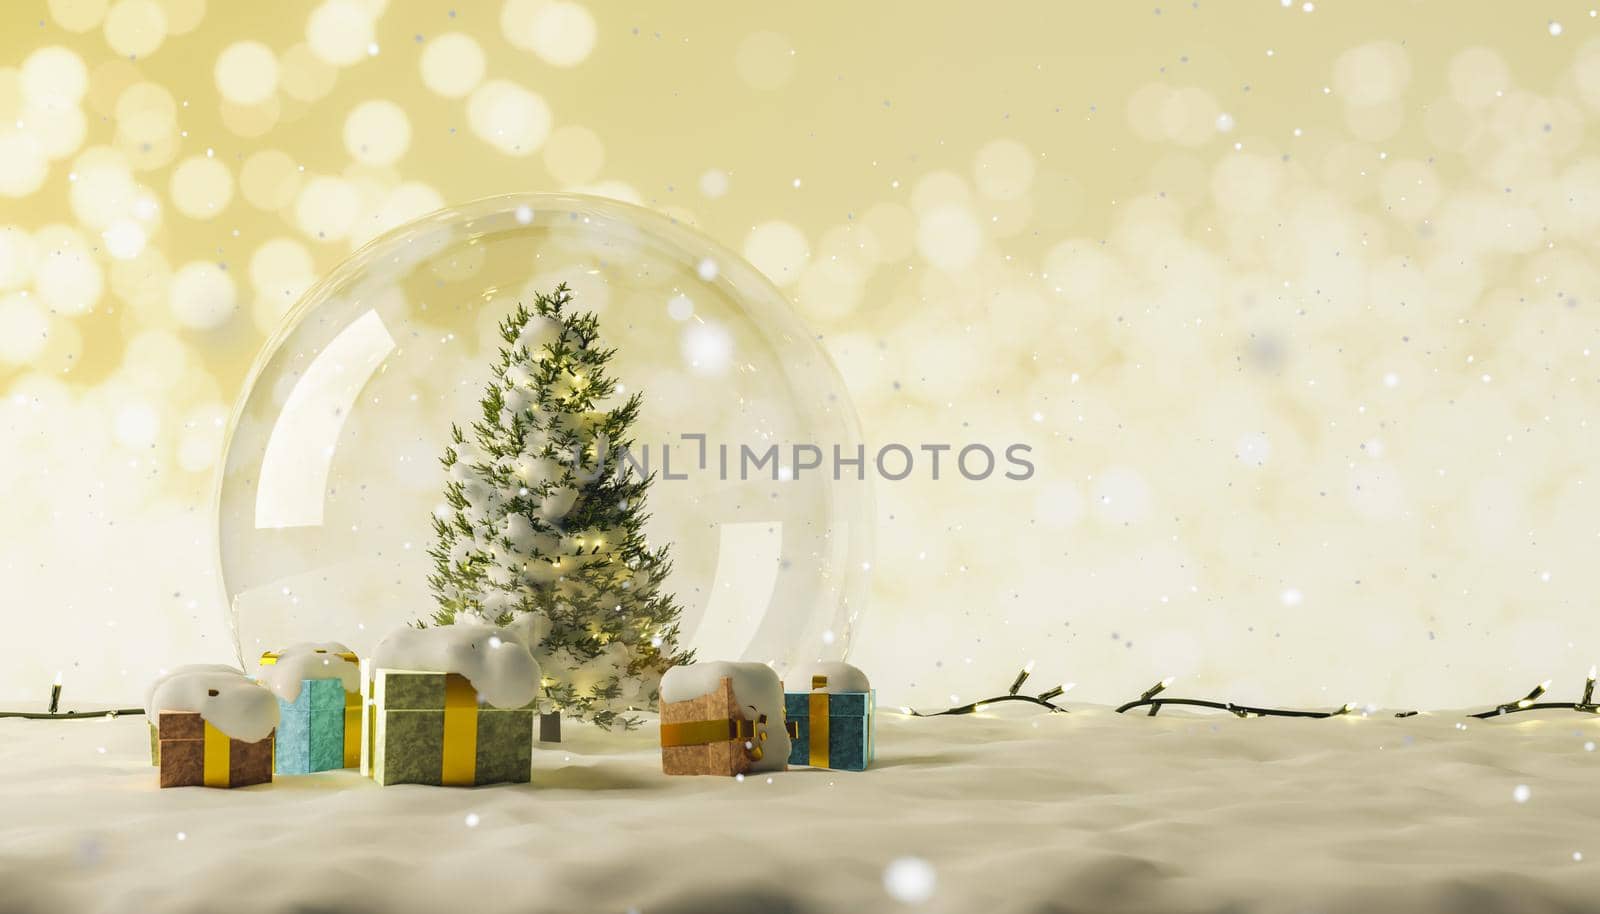 christmas ball on snow with gifts around and background of bright lights out of focus. 3d rendering